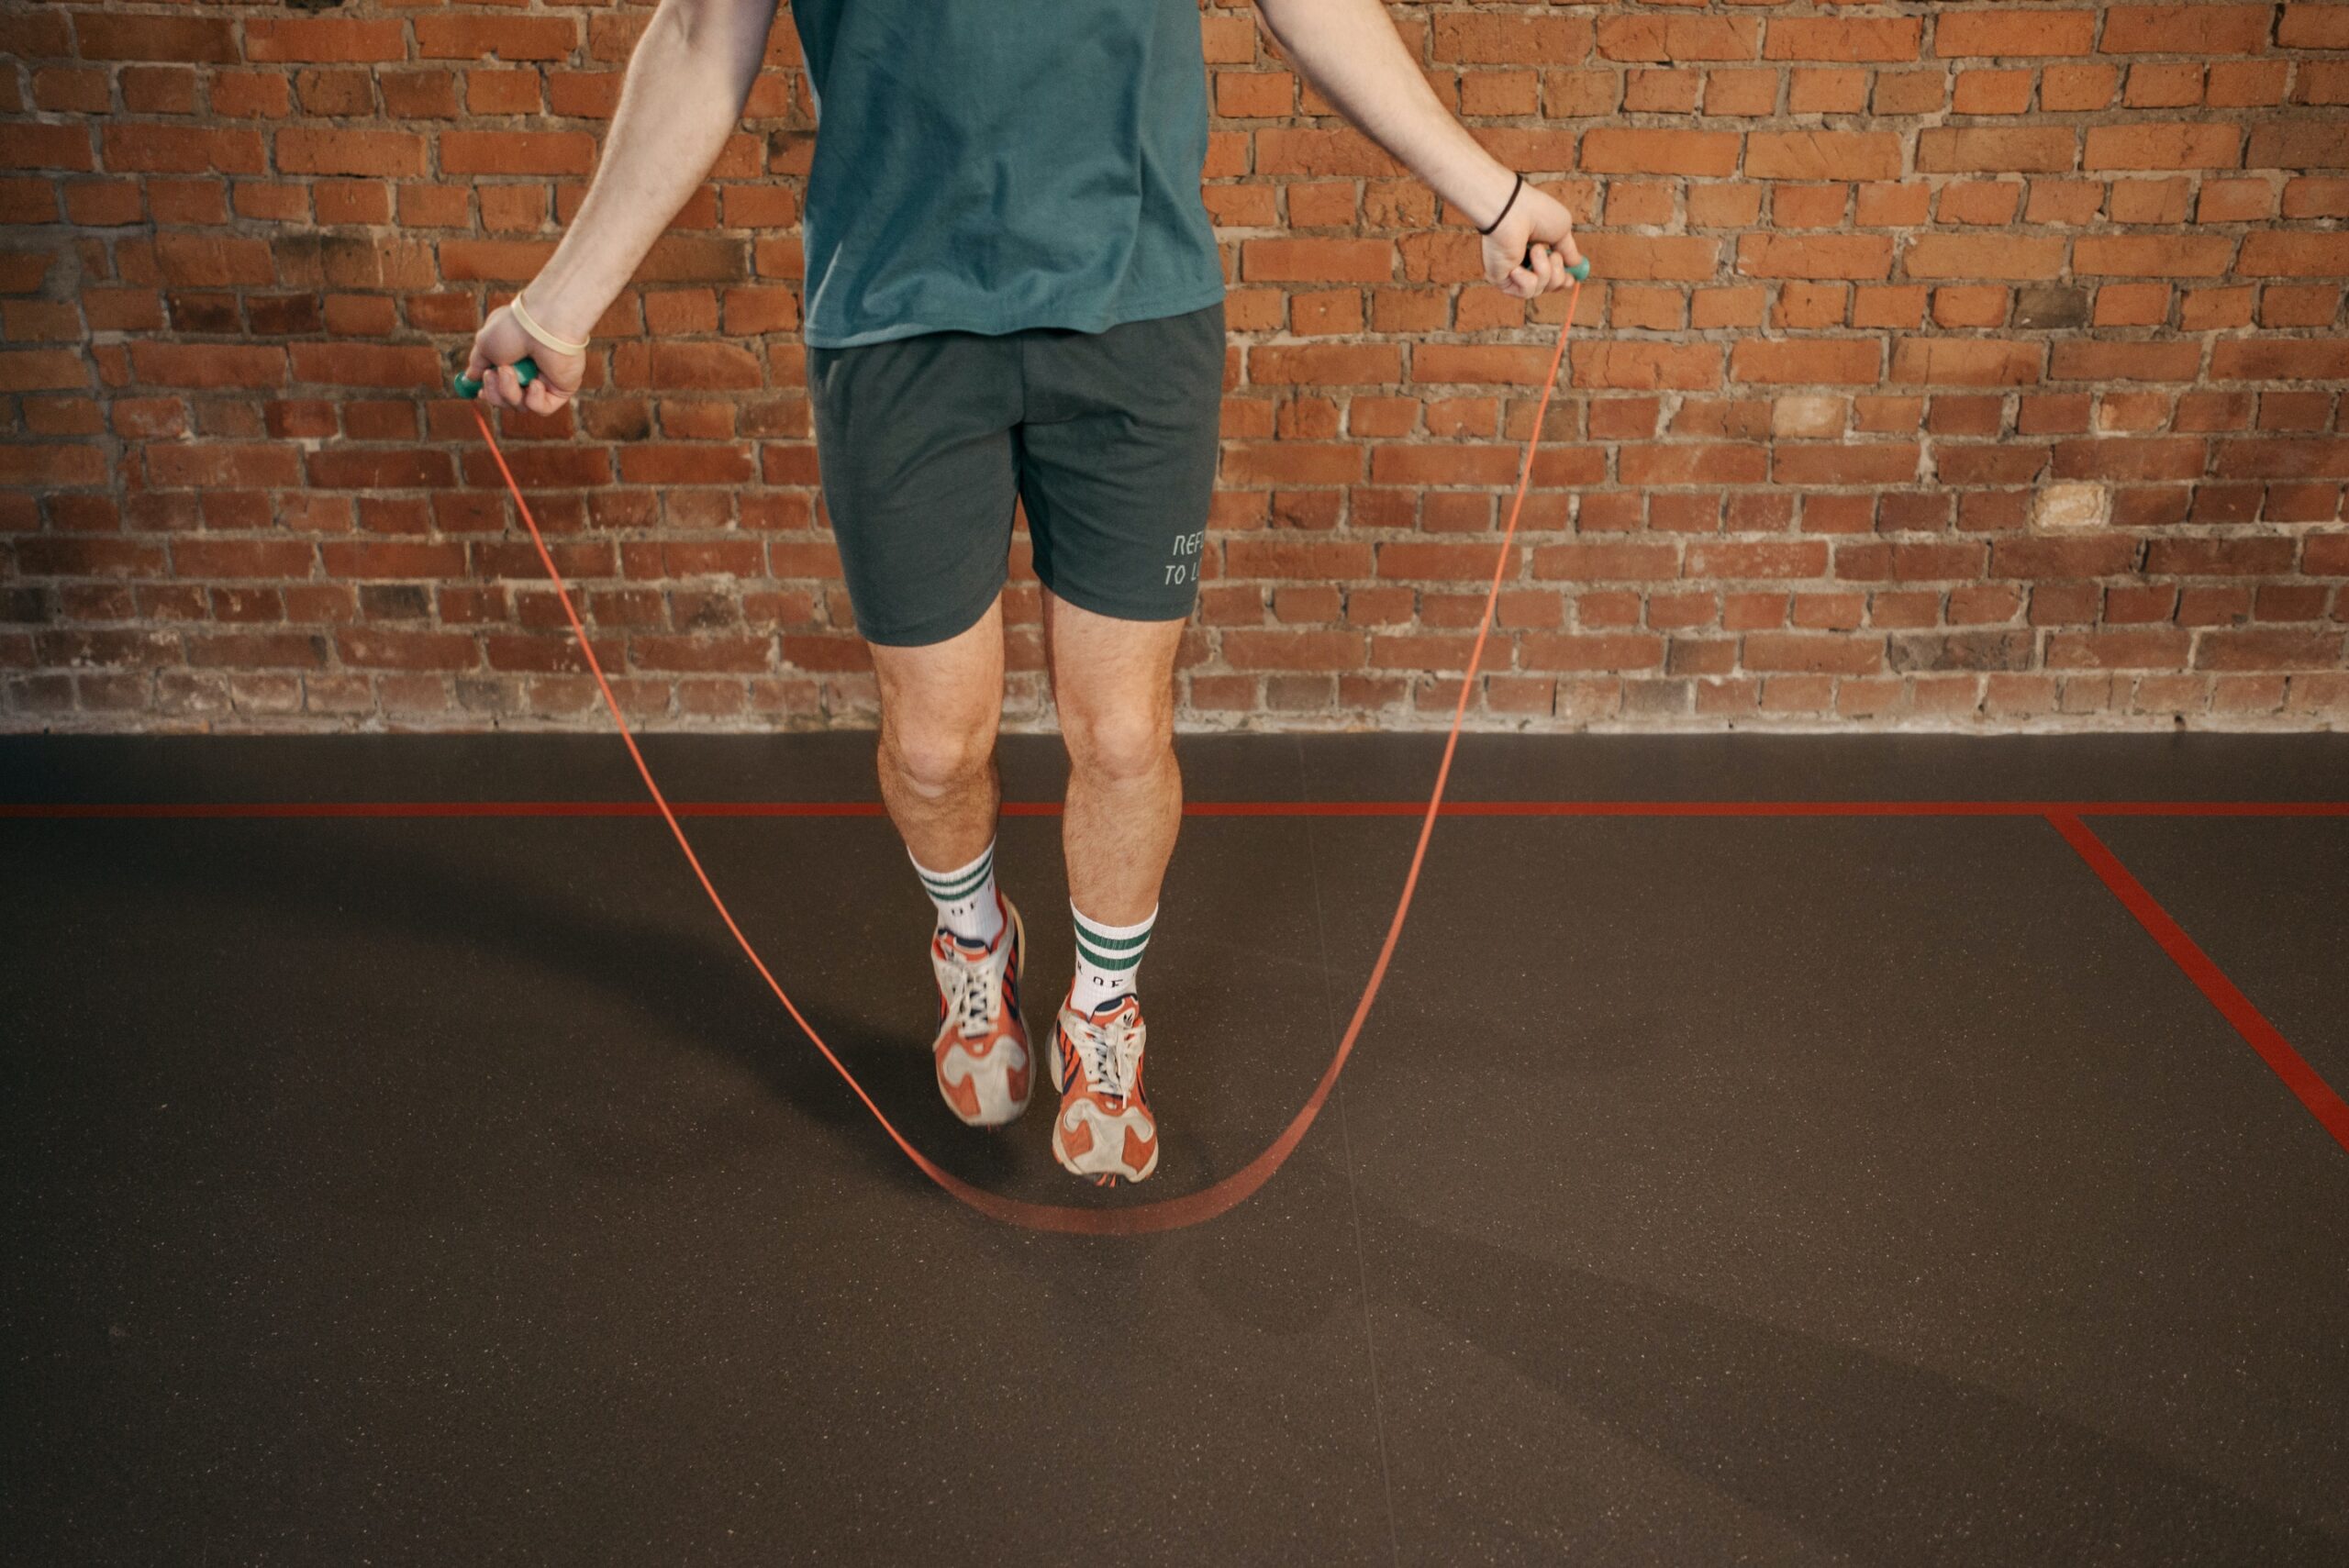 How Often Should You Jump Rope? - Weight Loss Made Practical